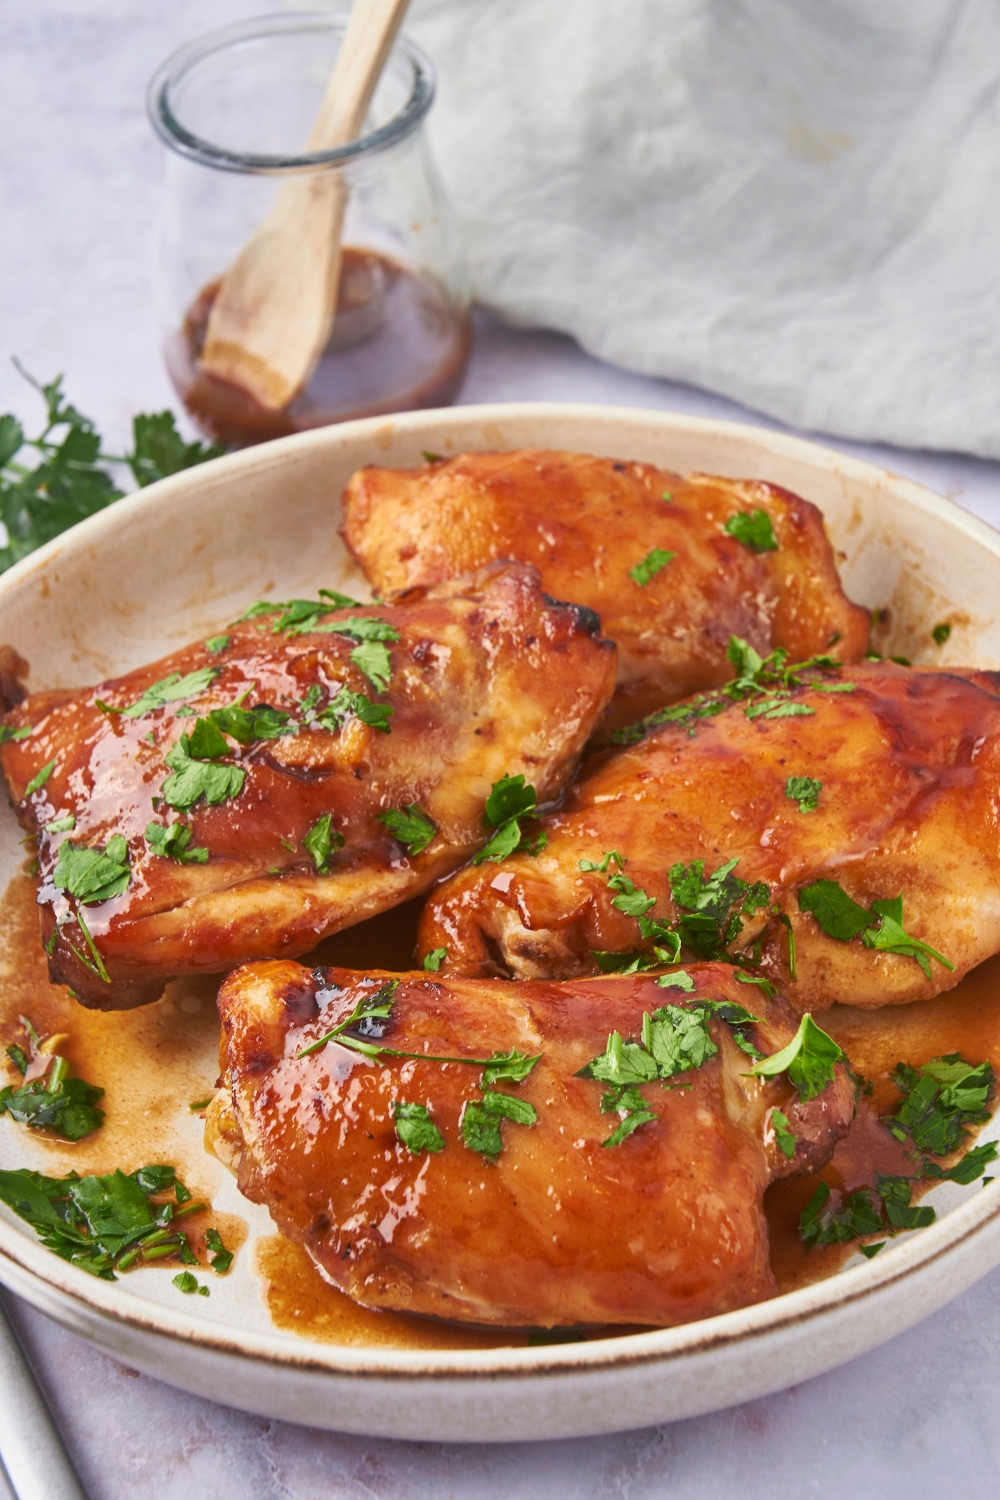 Baked chicken thighs in on a white plate. The chicken is coated in a brown sauce and garnished with fresh herbs.